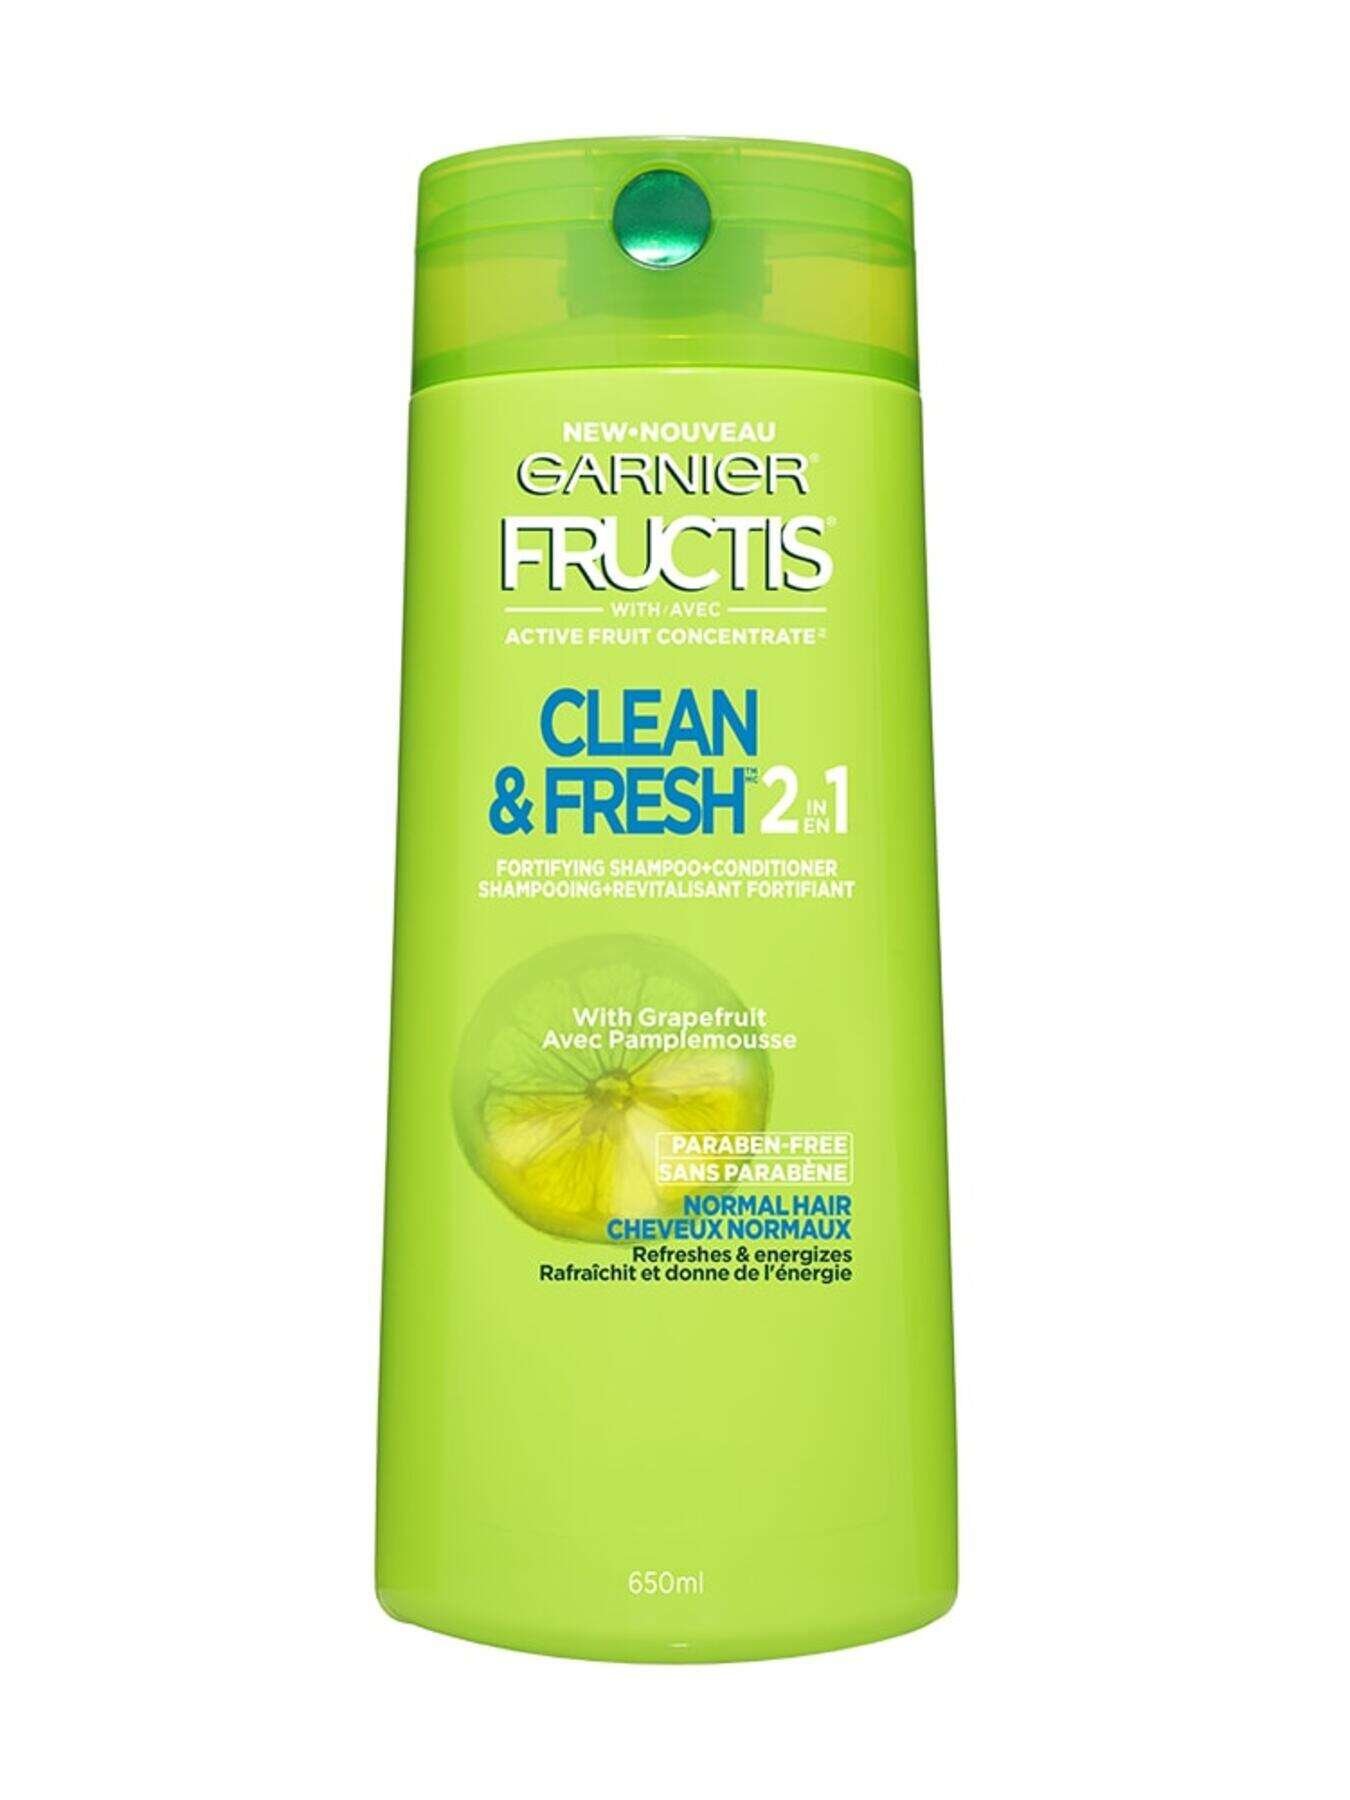 garnier hair fructis 2in1 fortifying shampoo and conditioner 650 ml 603084491827 t1